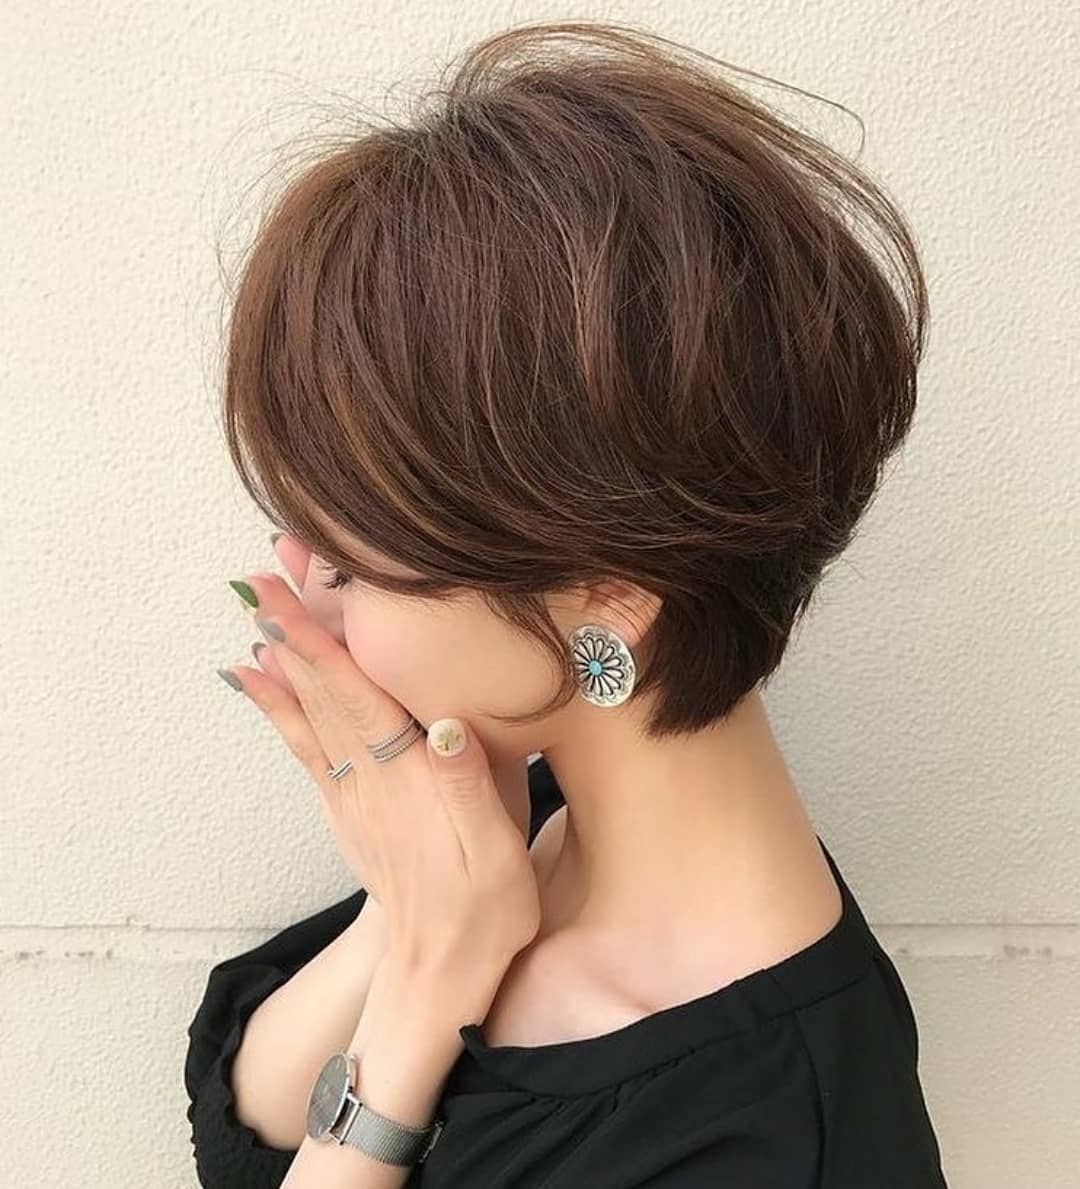 Amazing Short Haircut And Hair Style Ideas For Girls Live Enhanced